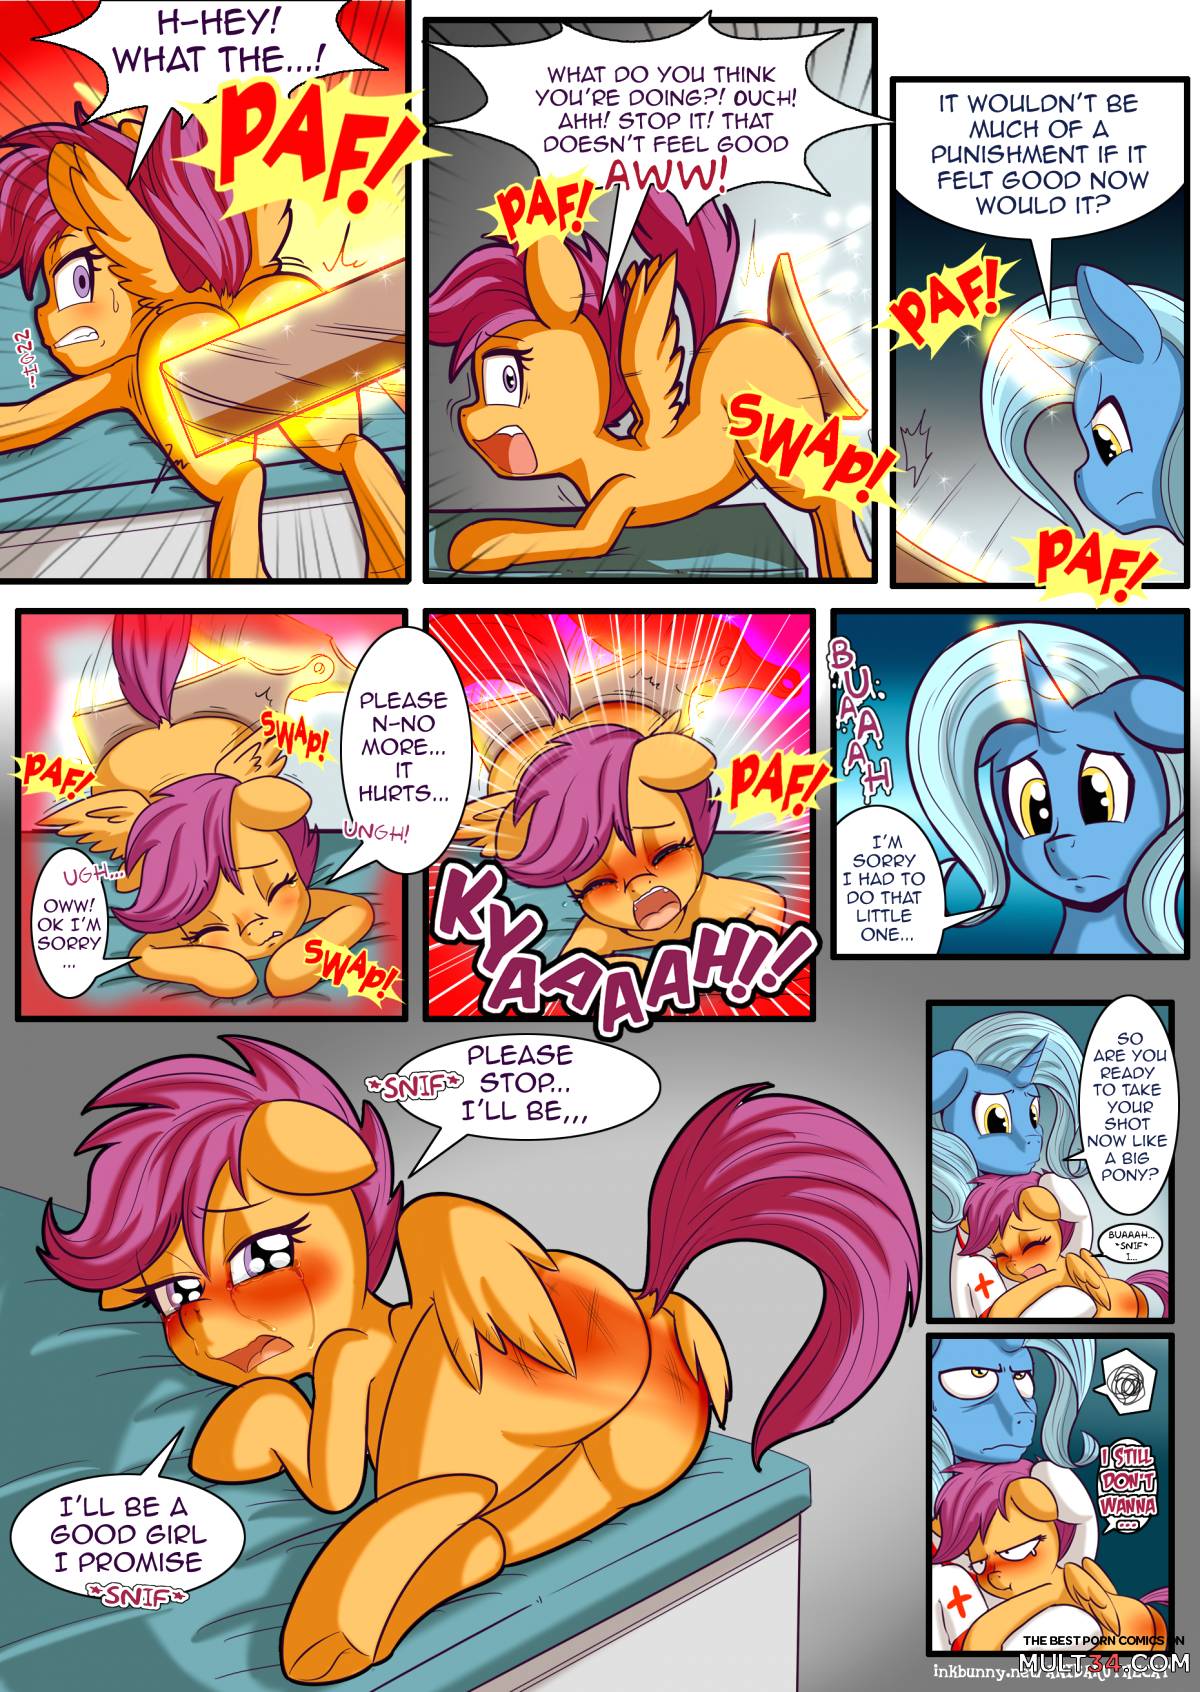 Cutie mark check up 2 page 6